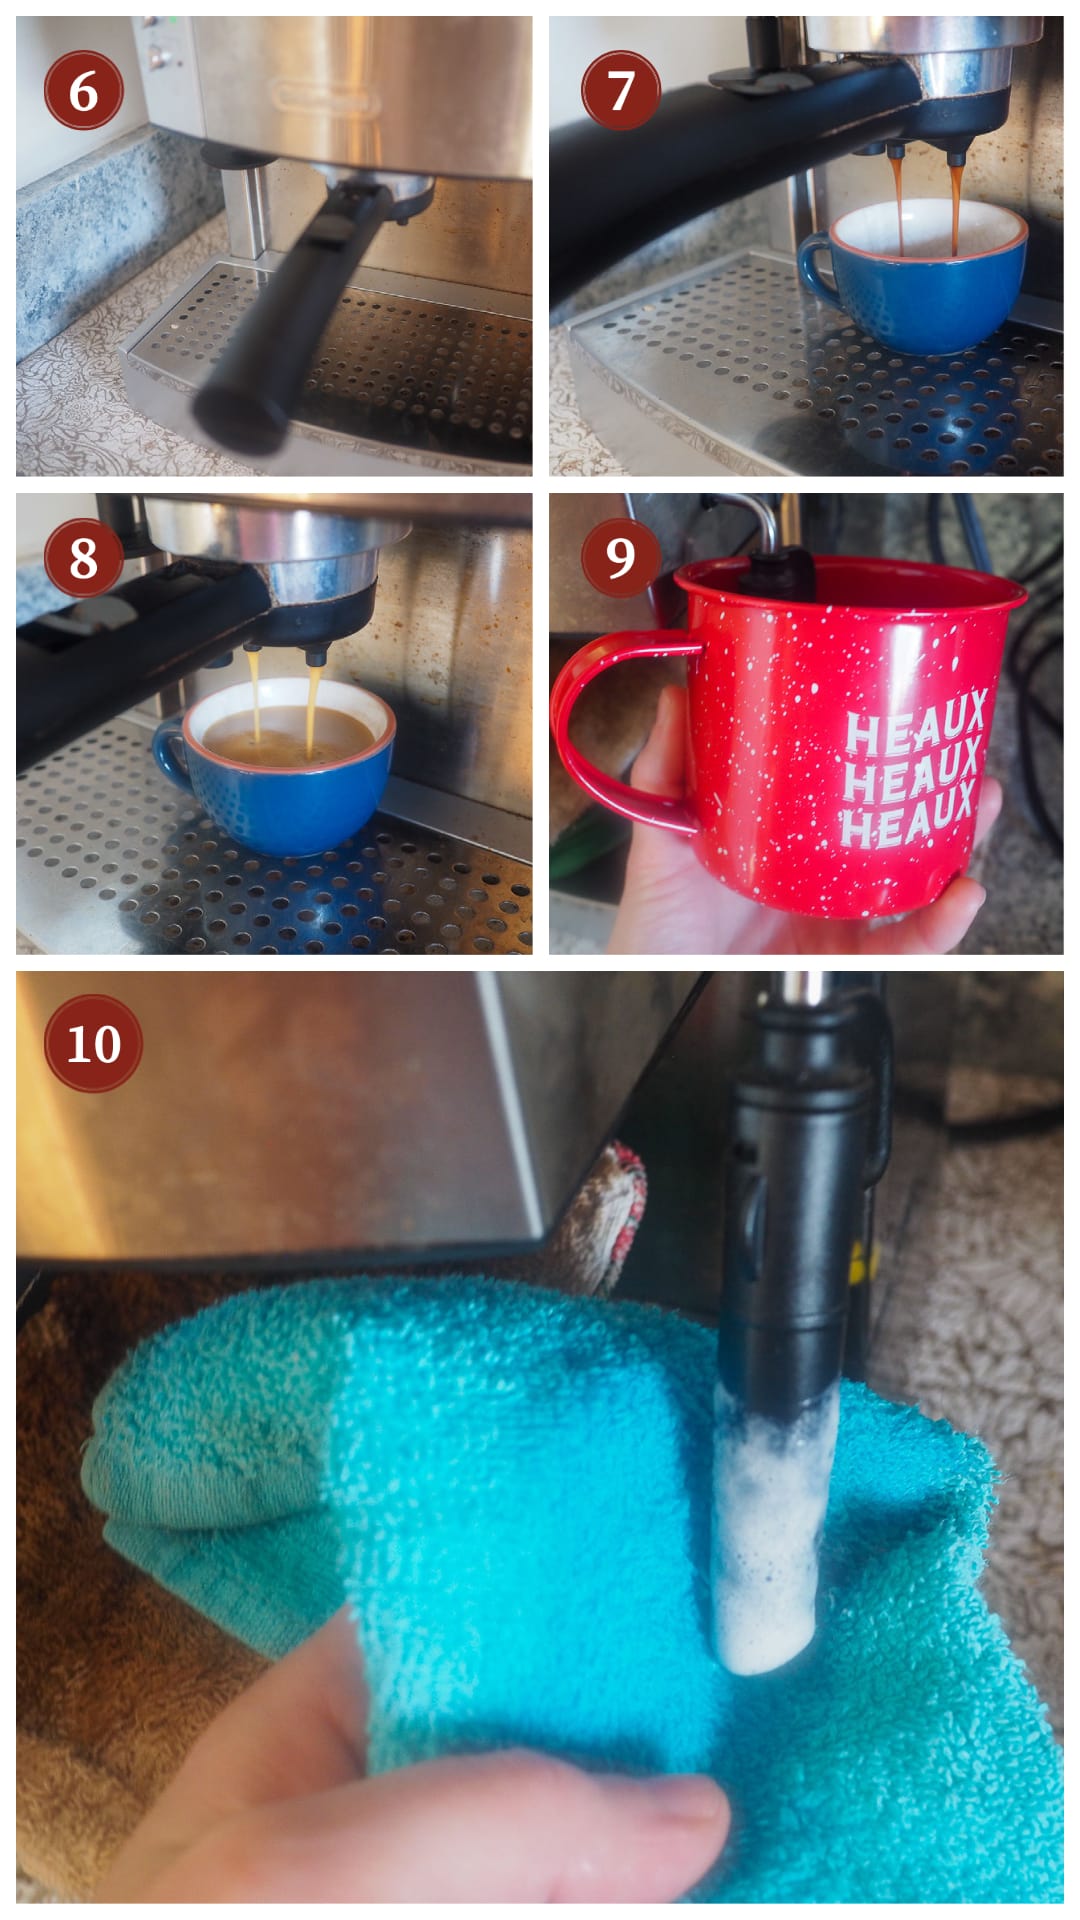 A collage of images showing how to make espresso, steps 6 - 10.